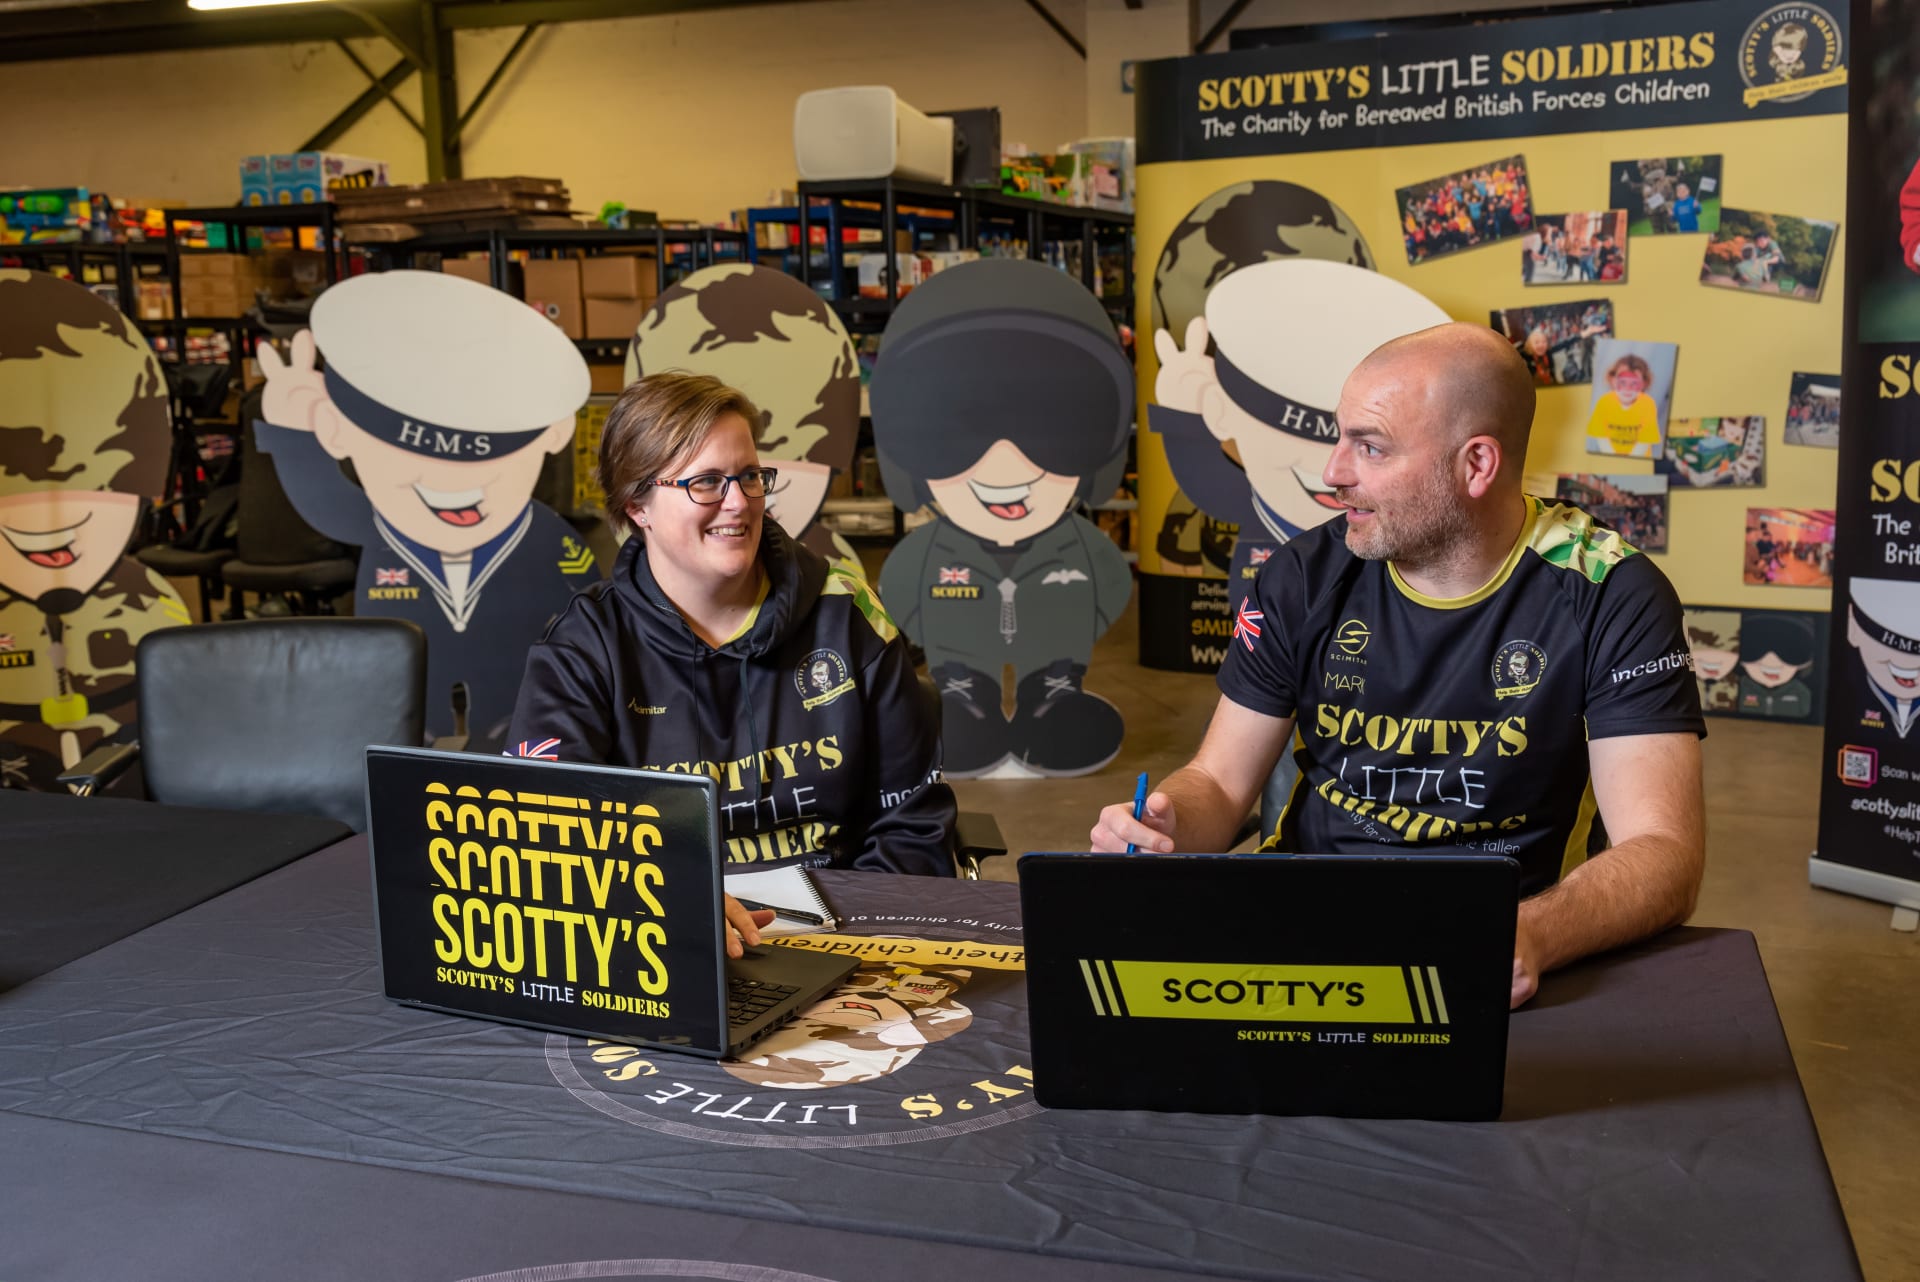 Charlie and Mark provide support for our Scotty members and their families